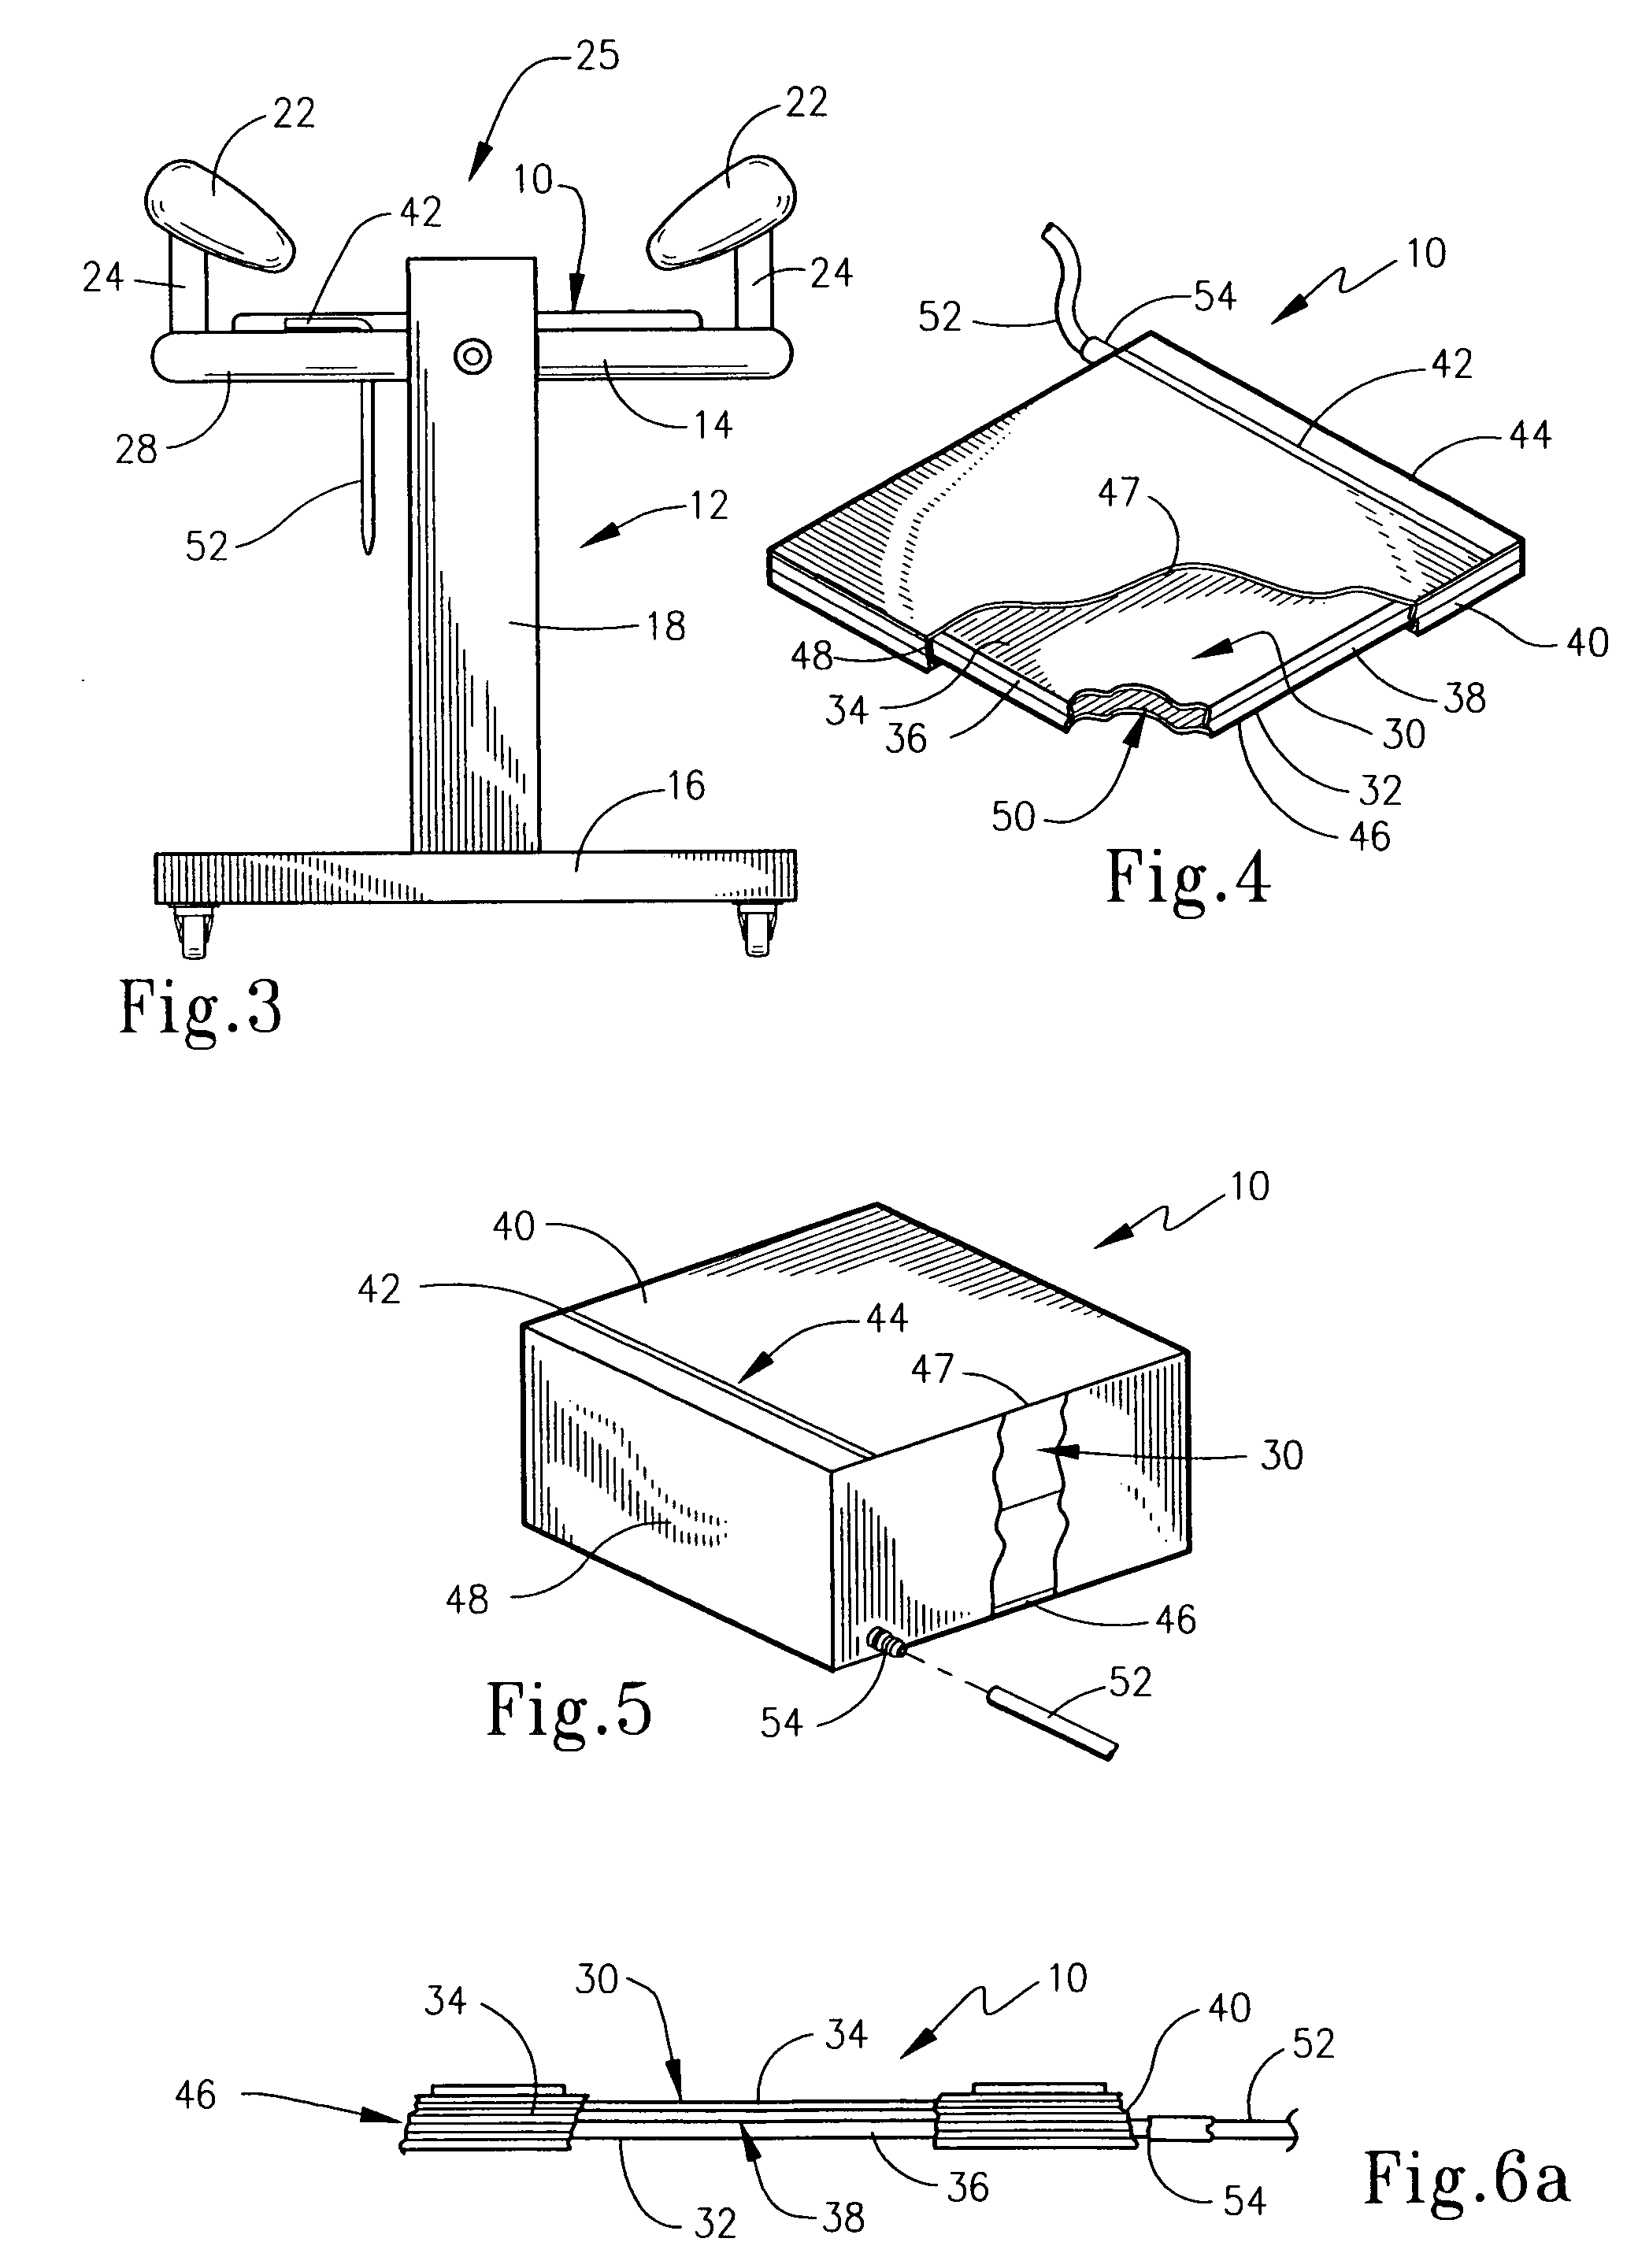 Inflatable cushion apparatus for use in surgical procedures and surgical method utilizing the same